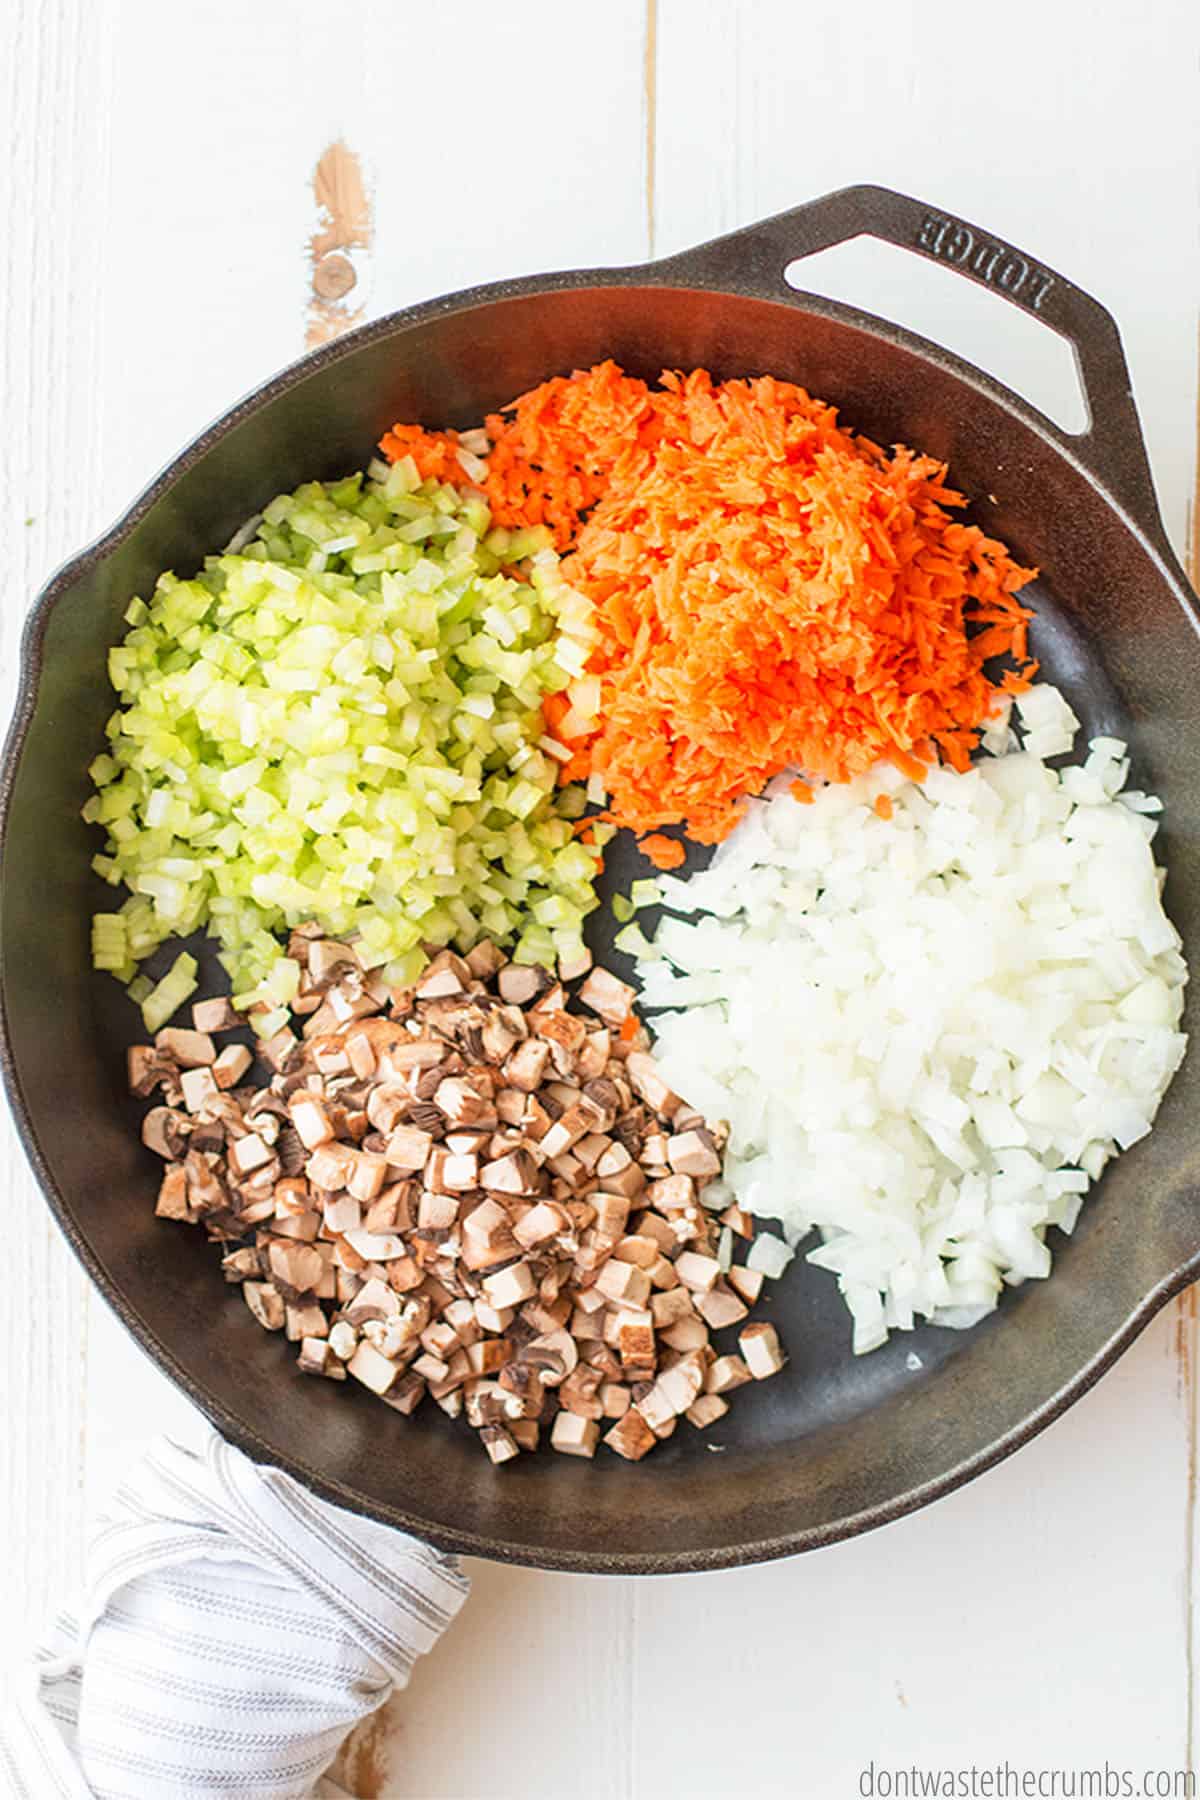 Finely chopped peppers, mushrooms, and onions, as well as shredded carrots, sit in a cast iron skillet.